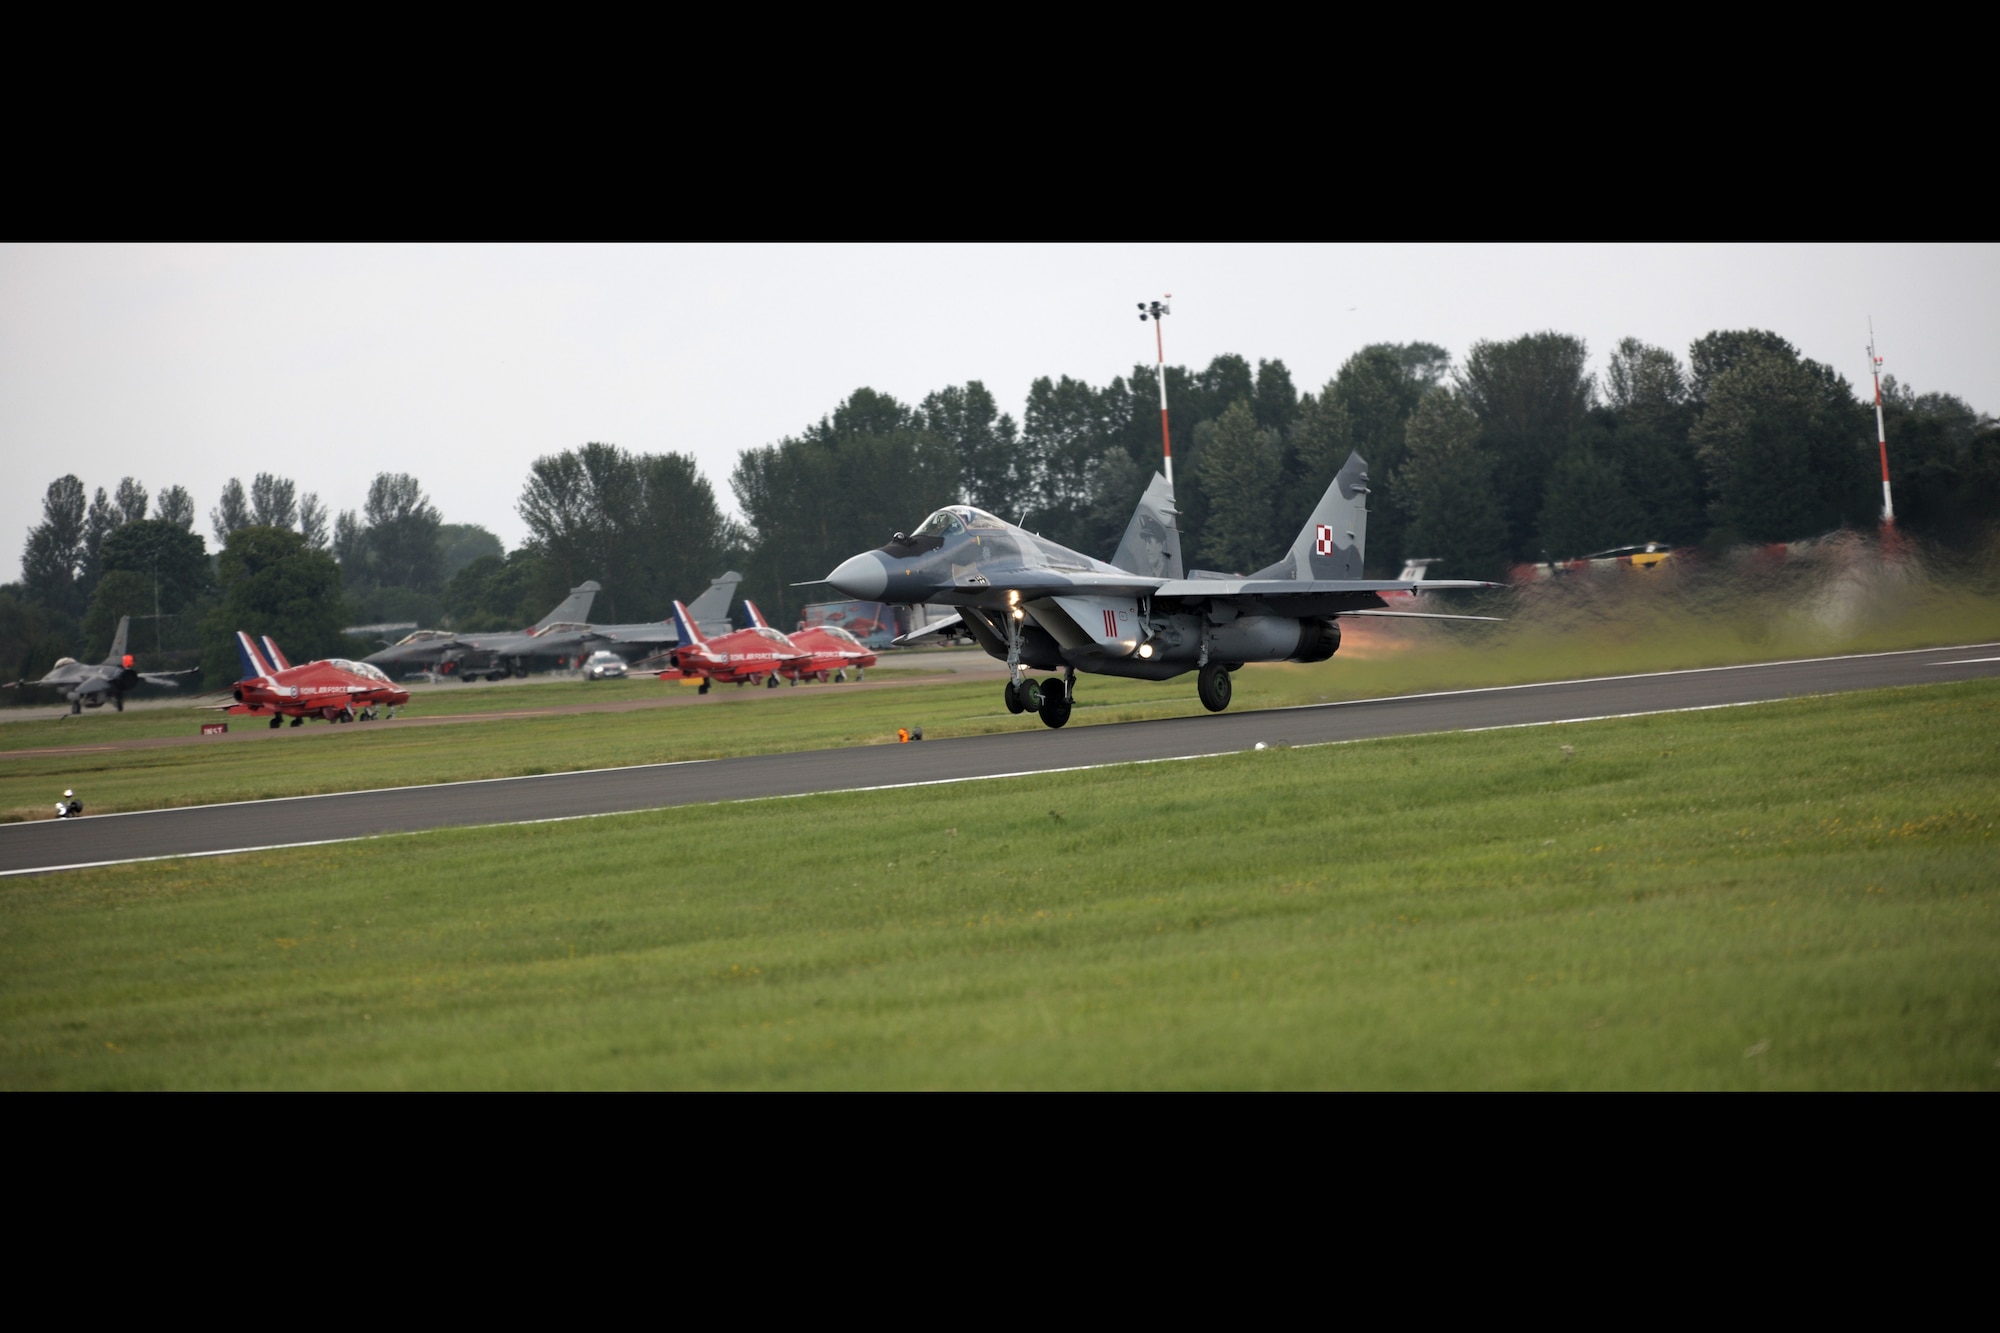 RAF FAIRFORD, United Kingdom - A Polish MiG-29 takes off during the Royal International Air Tattoo here July 8. More than 130,000 people attended the tattoo. (U.S. Air Force photo by Master Sgt. John Barton)